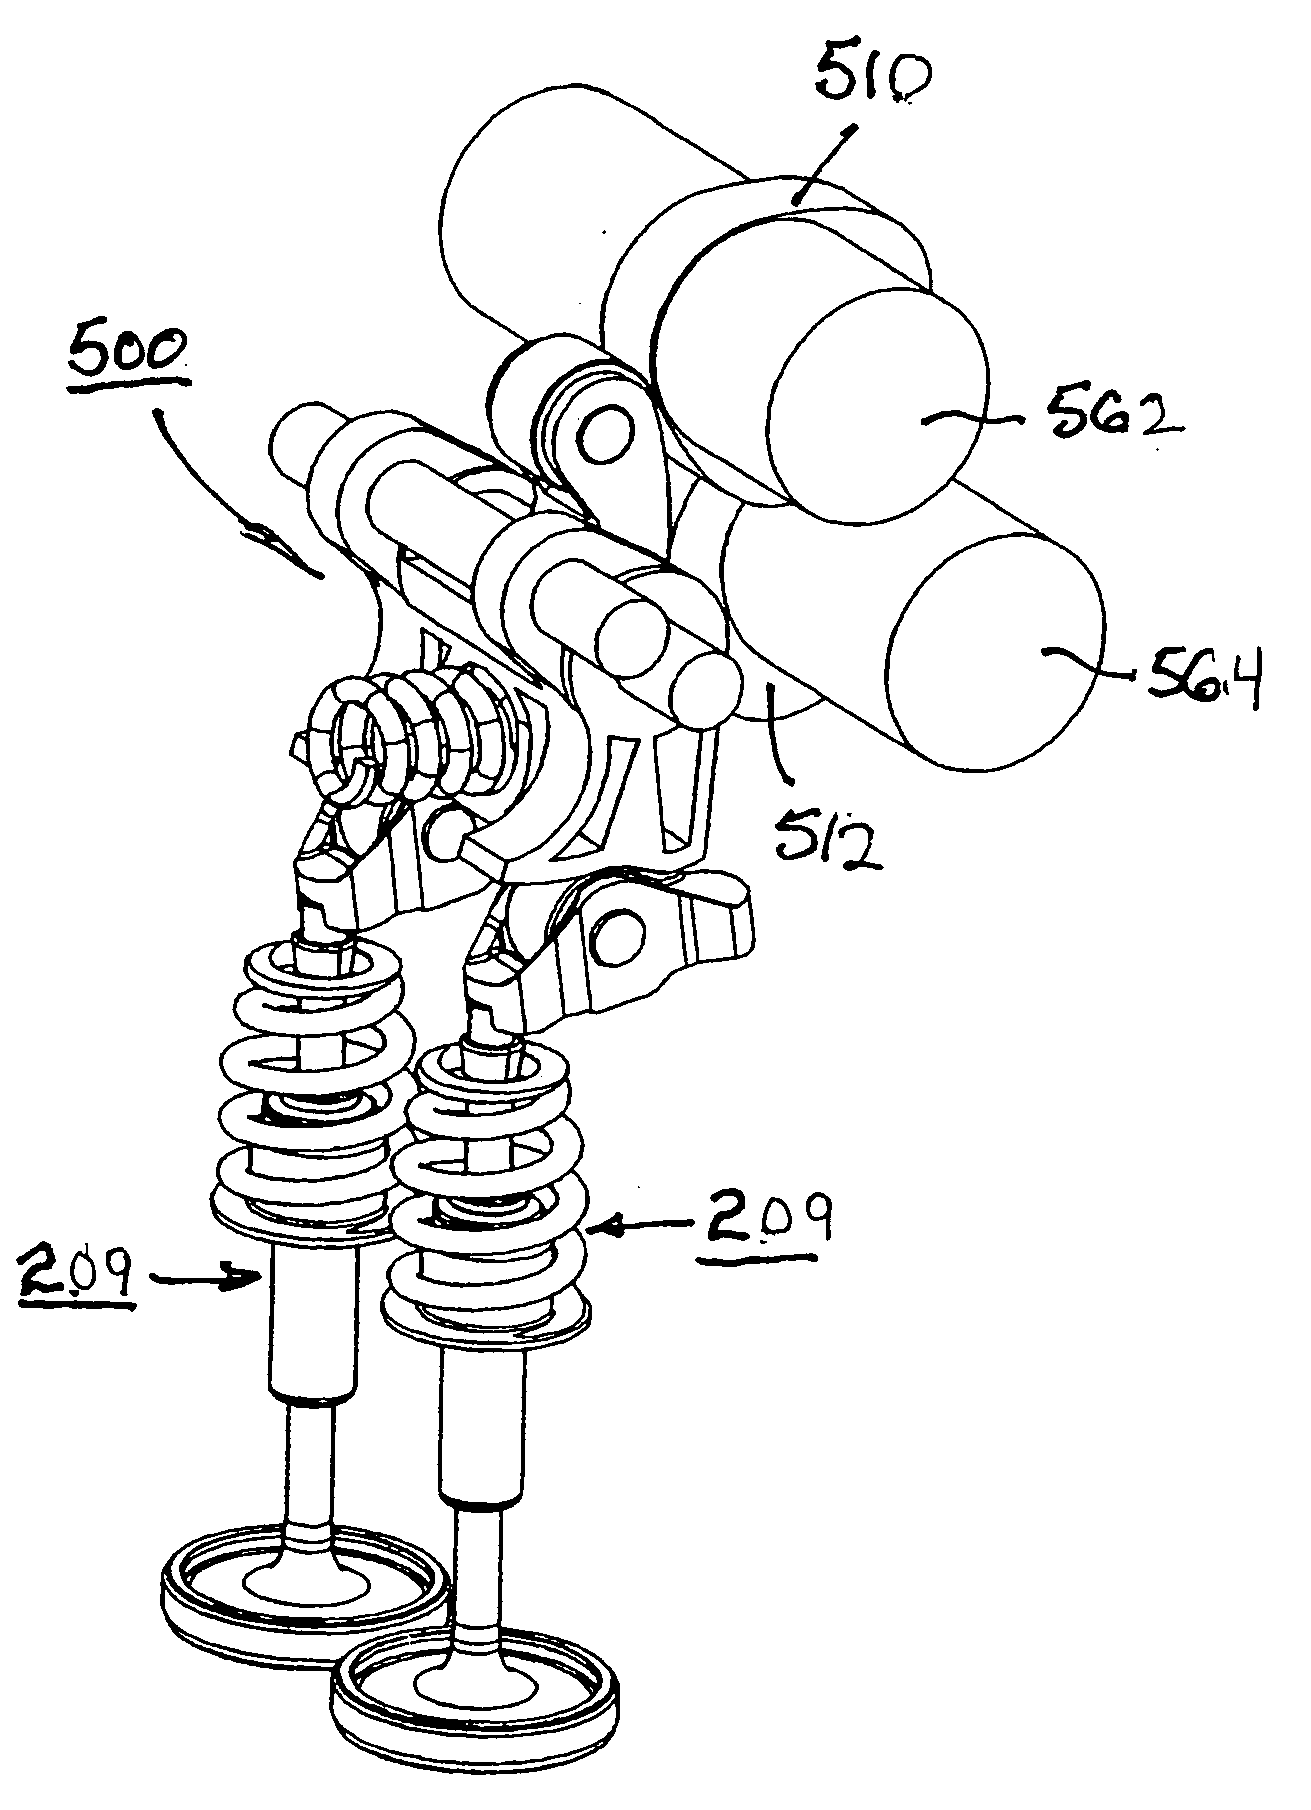 Phaser-actuated continuously variable valve actuation system with lost motion capability